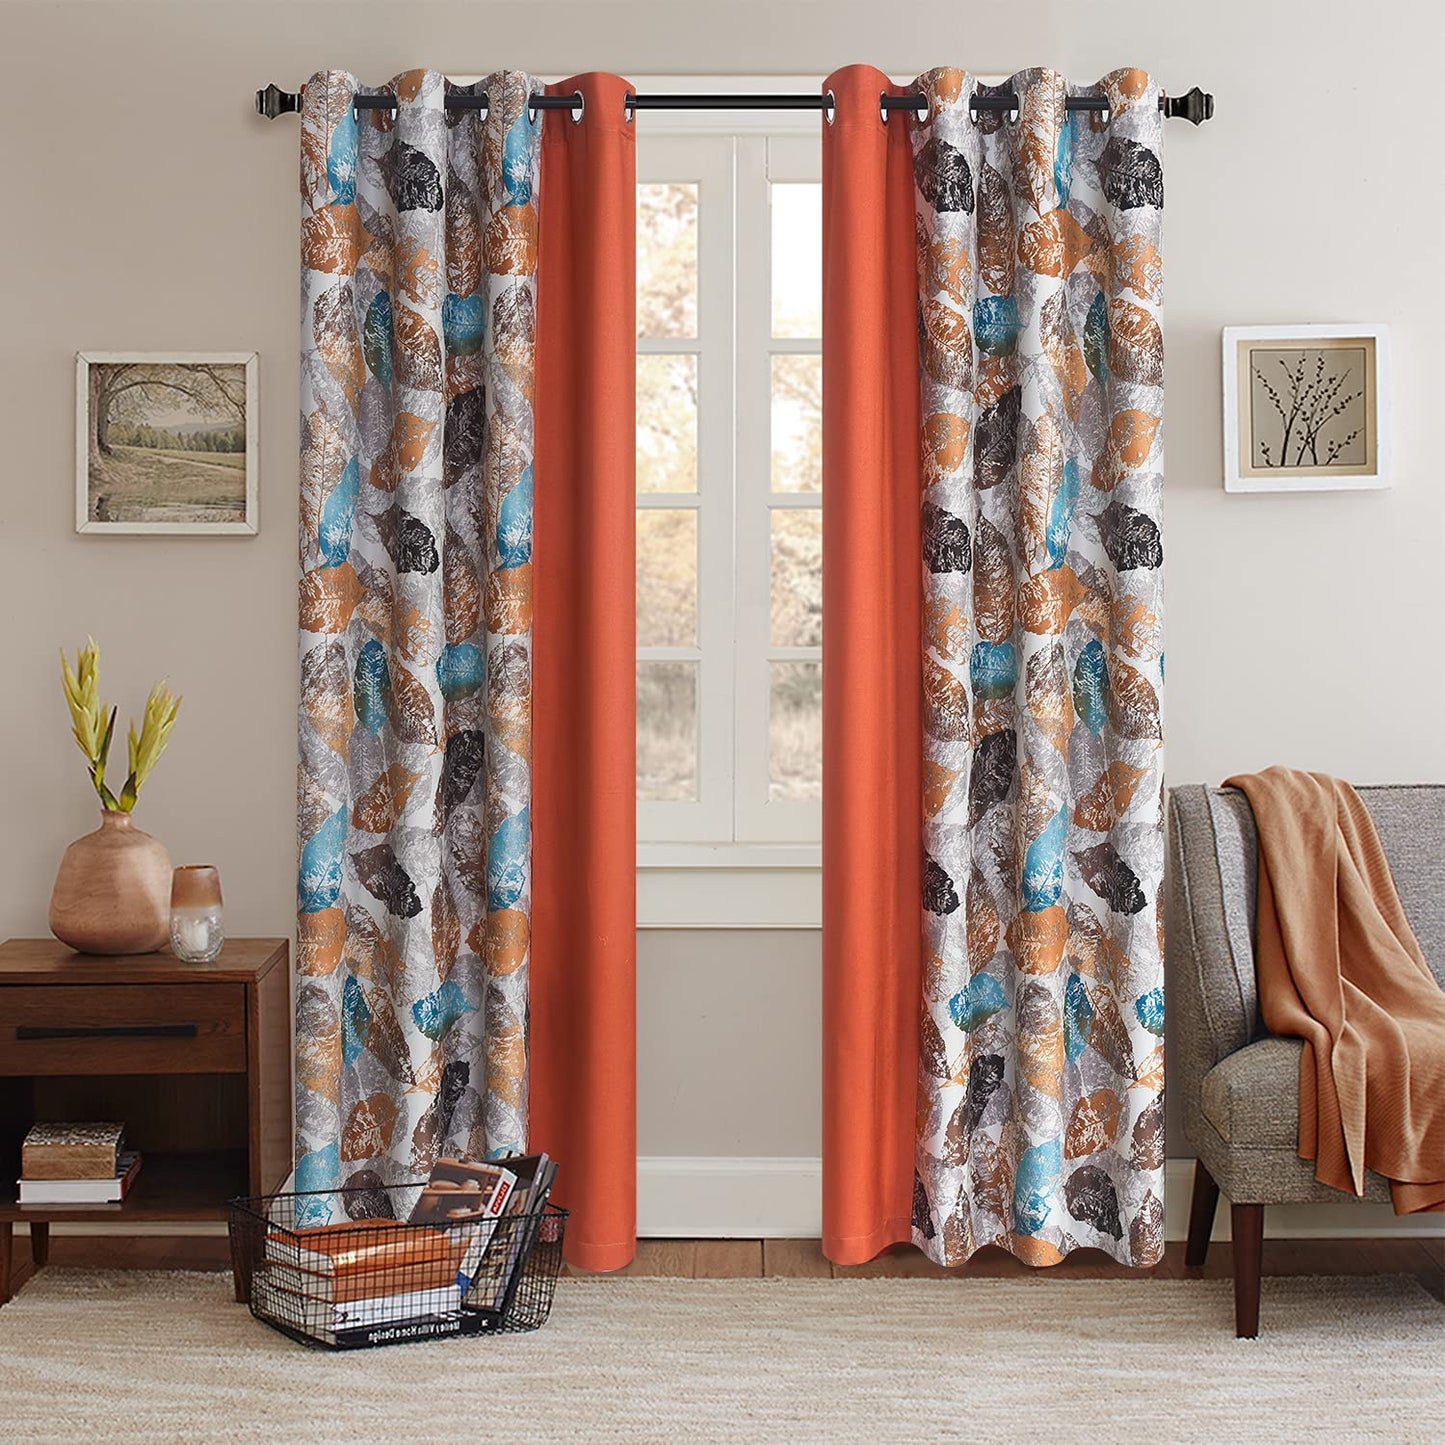 Mix and Match Curtain Floral Window Drapes Sitiching Patio for Livingroom Darkening Grommet Top 2 Panels Leaf Printing